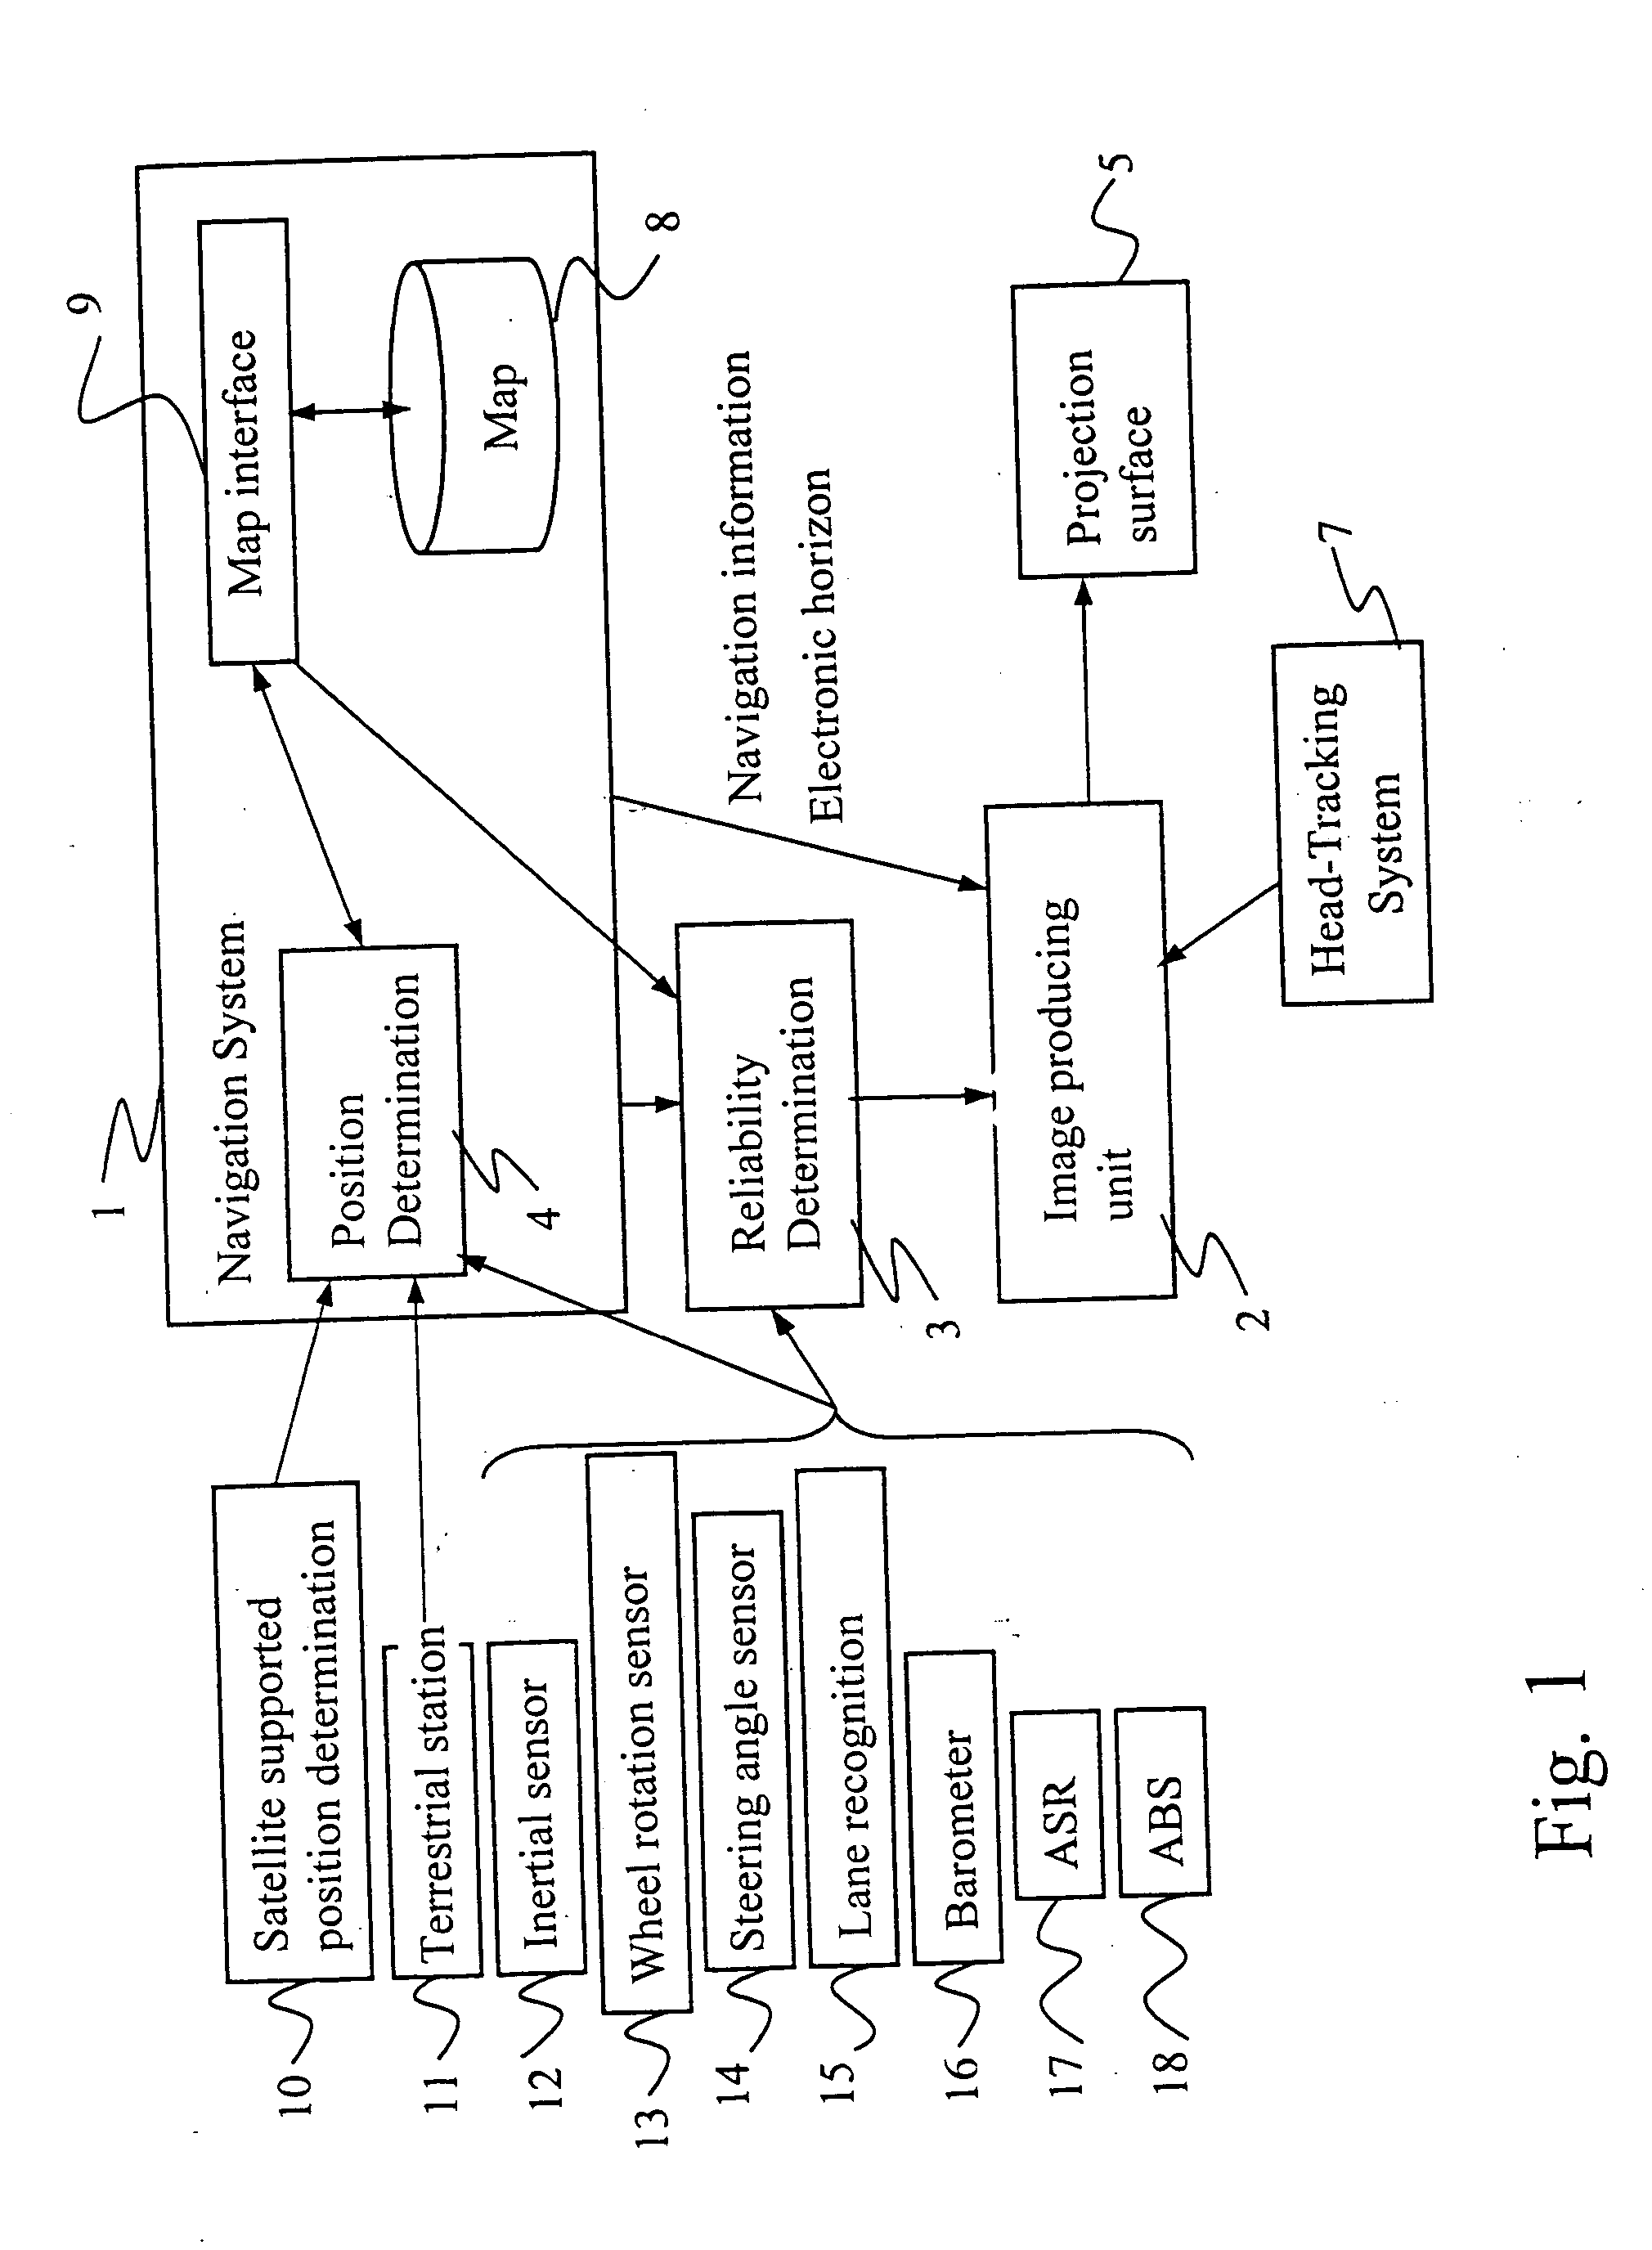 Device and process for displaying navigation information